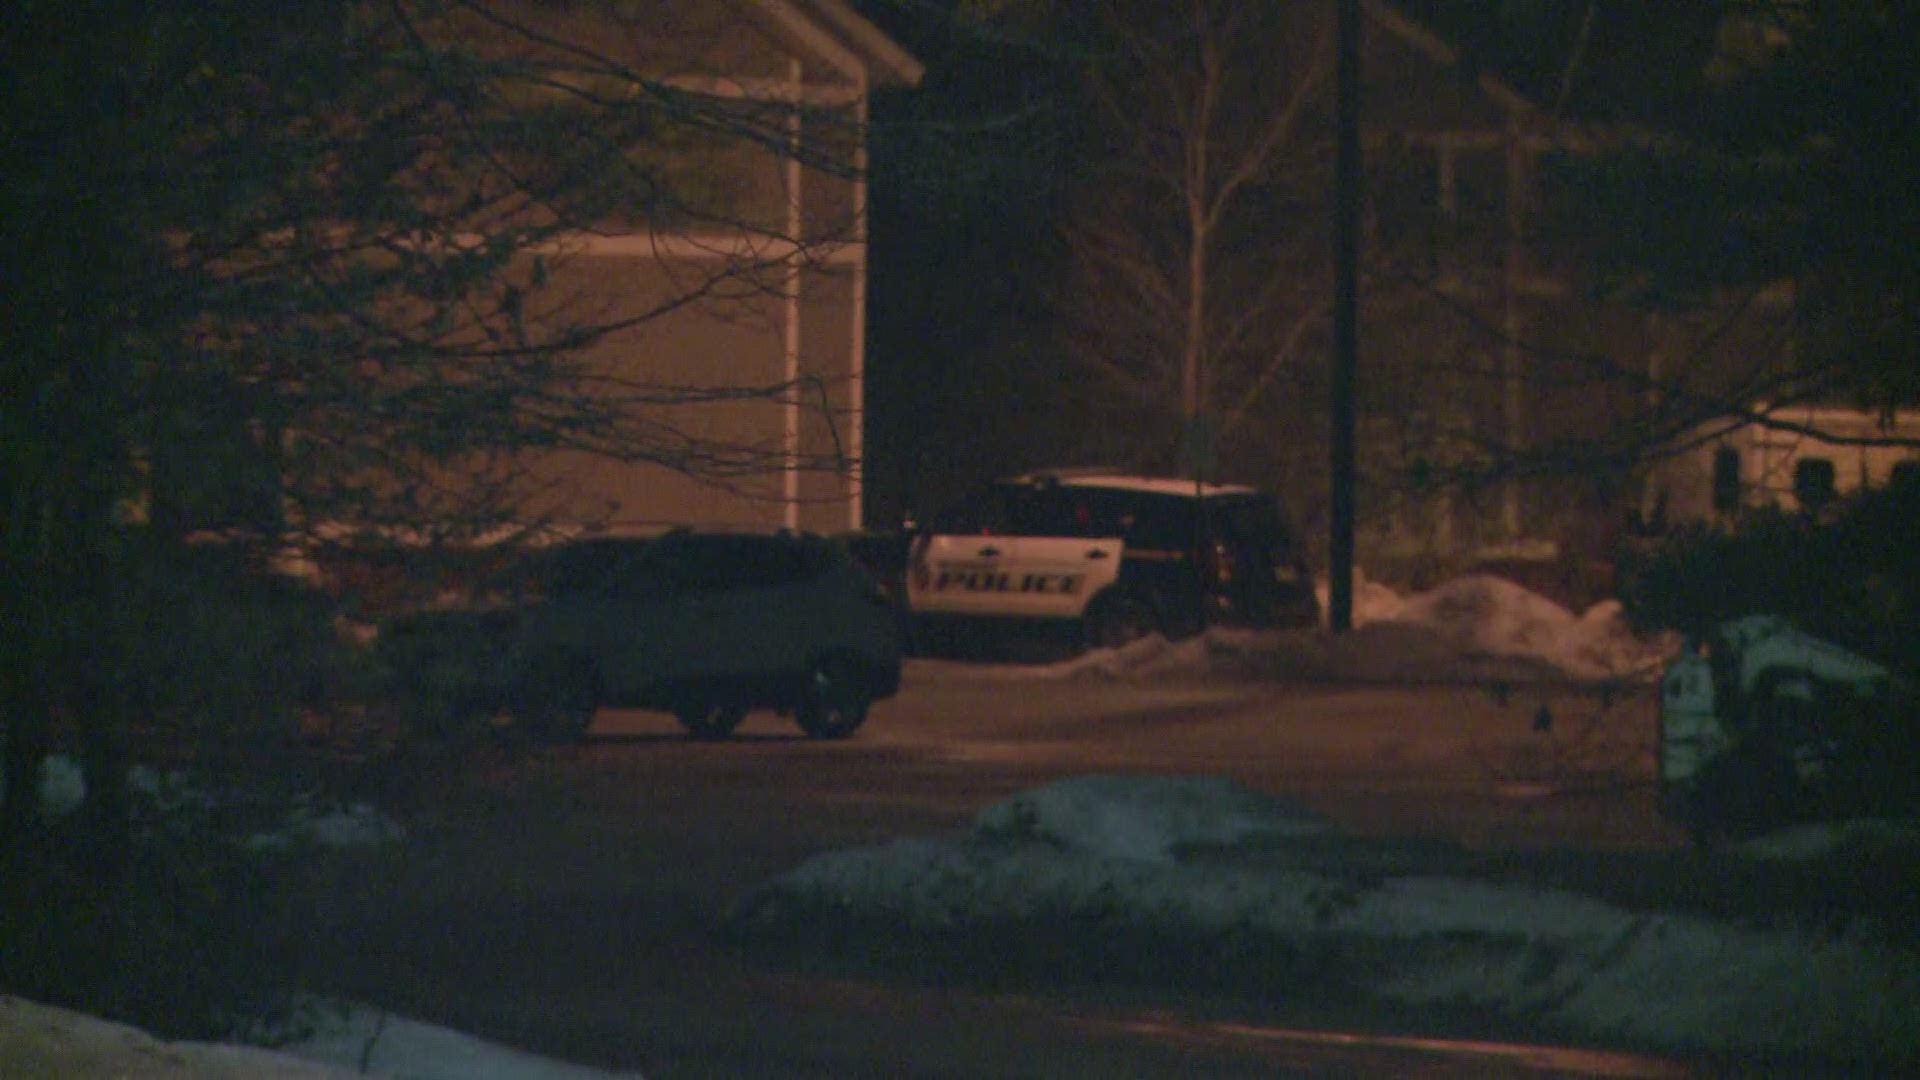 Police responded to a man with a rifle in Brunswick resulting in a standoff.